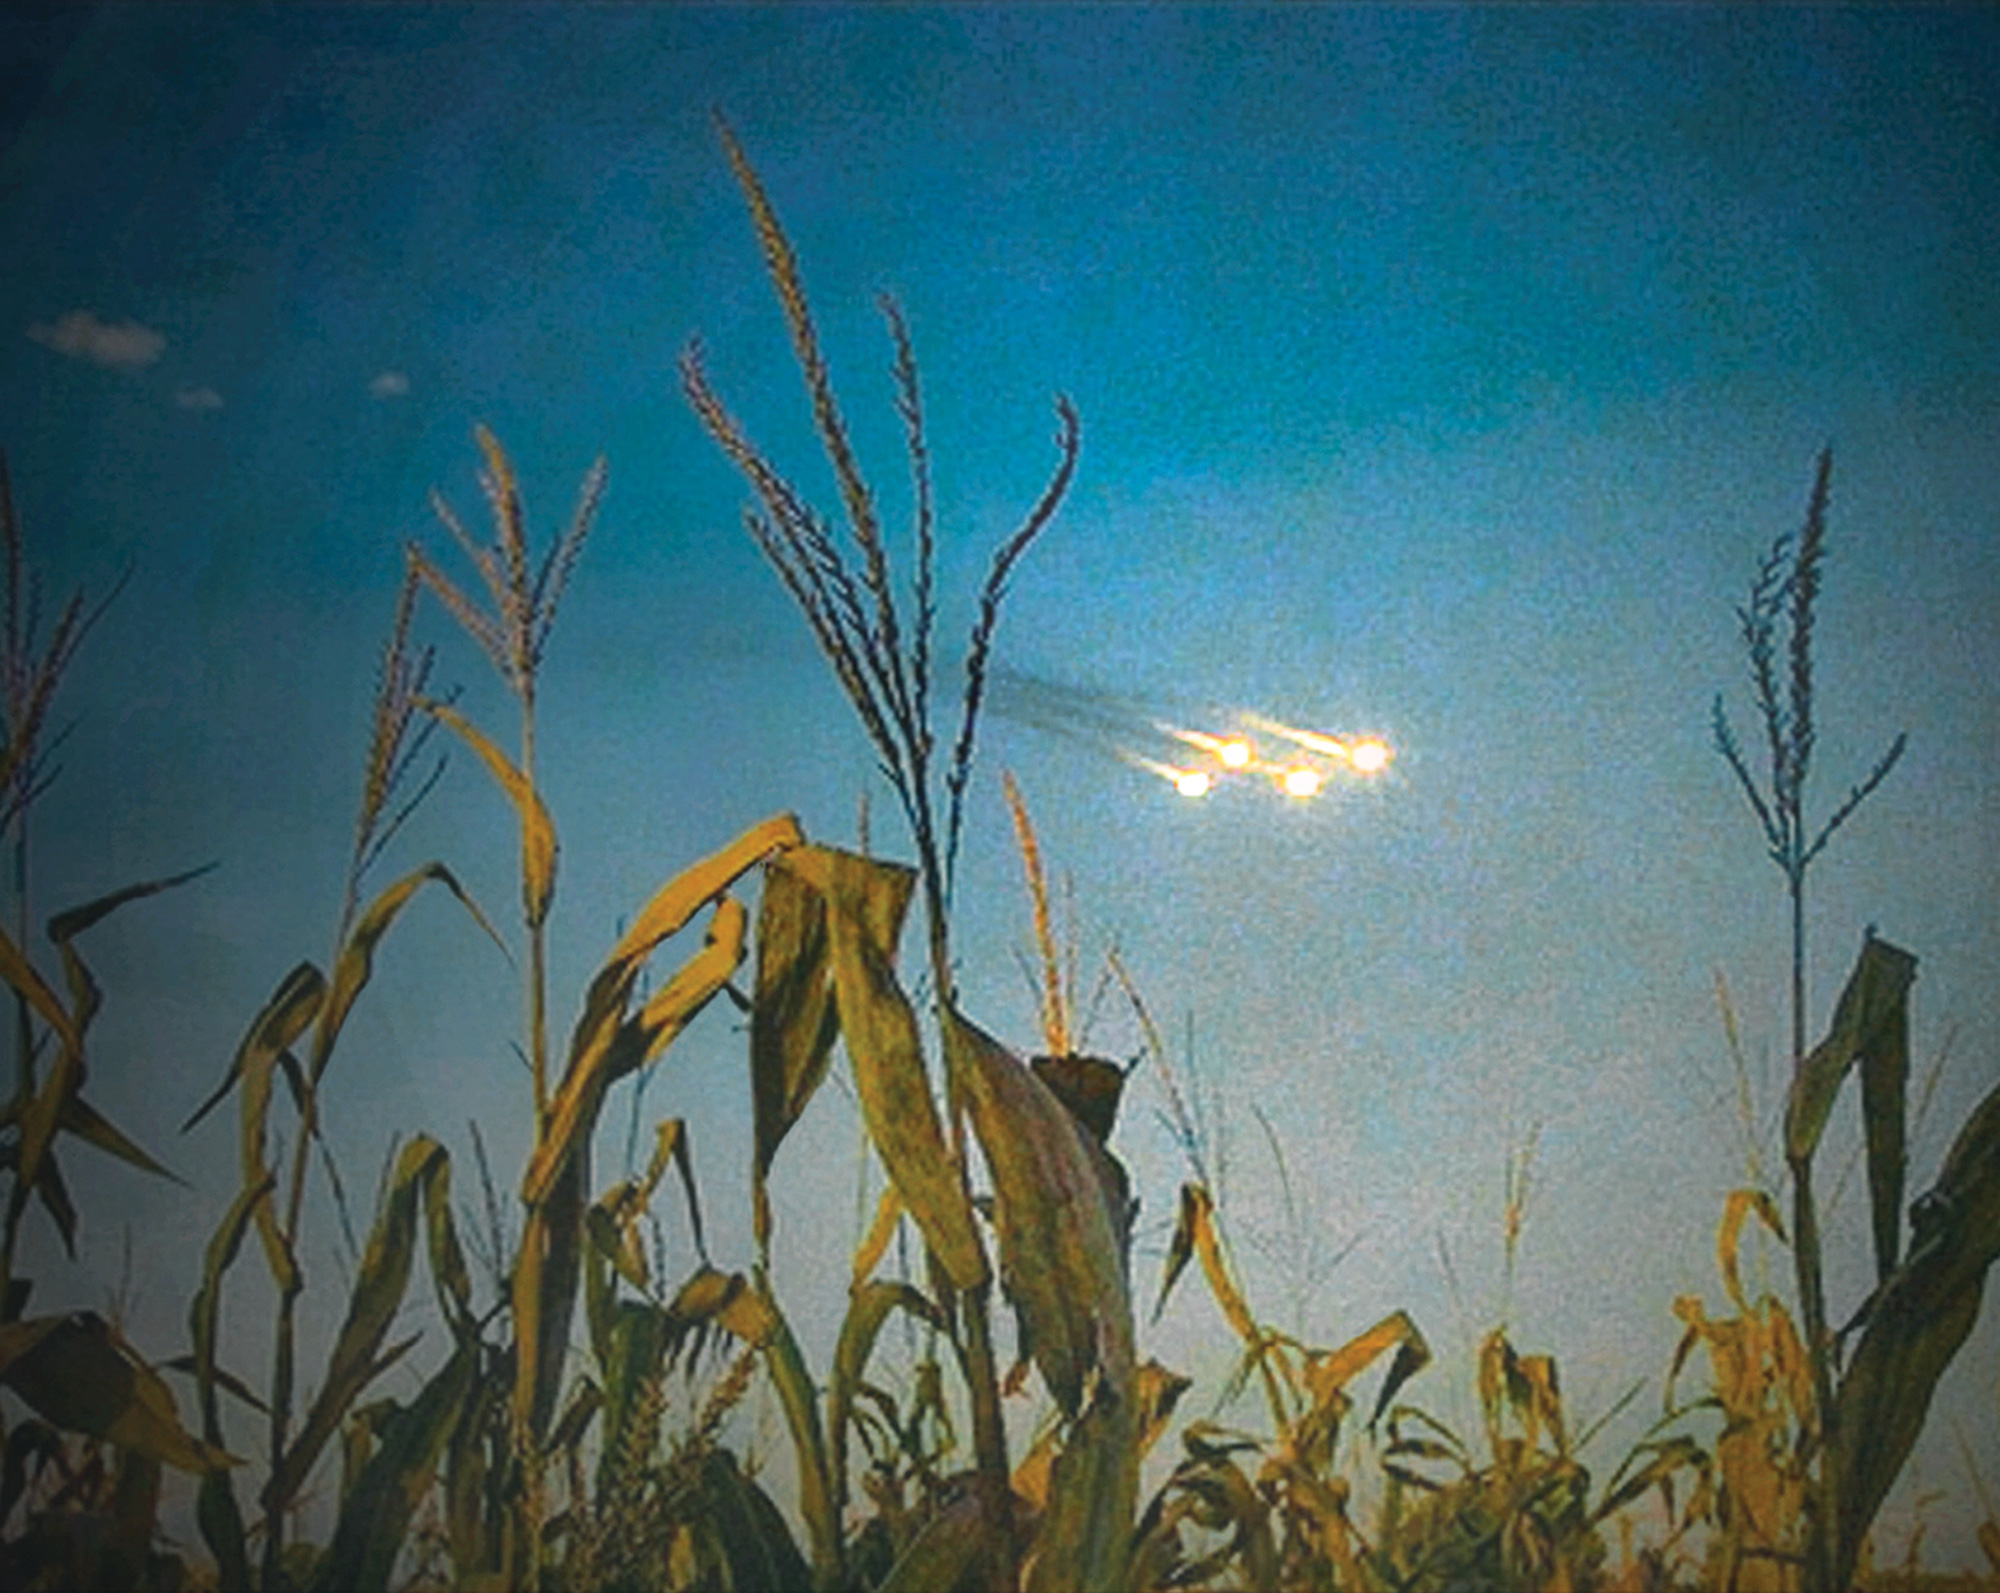 Oliver Wasow’s two thousand and nine artwork “Hallucination (Wisconsin).” It depicts some kind of possibly alien space crafts in the sky above a cornfield.